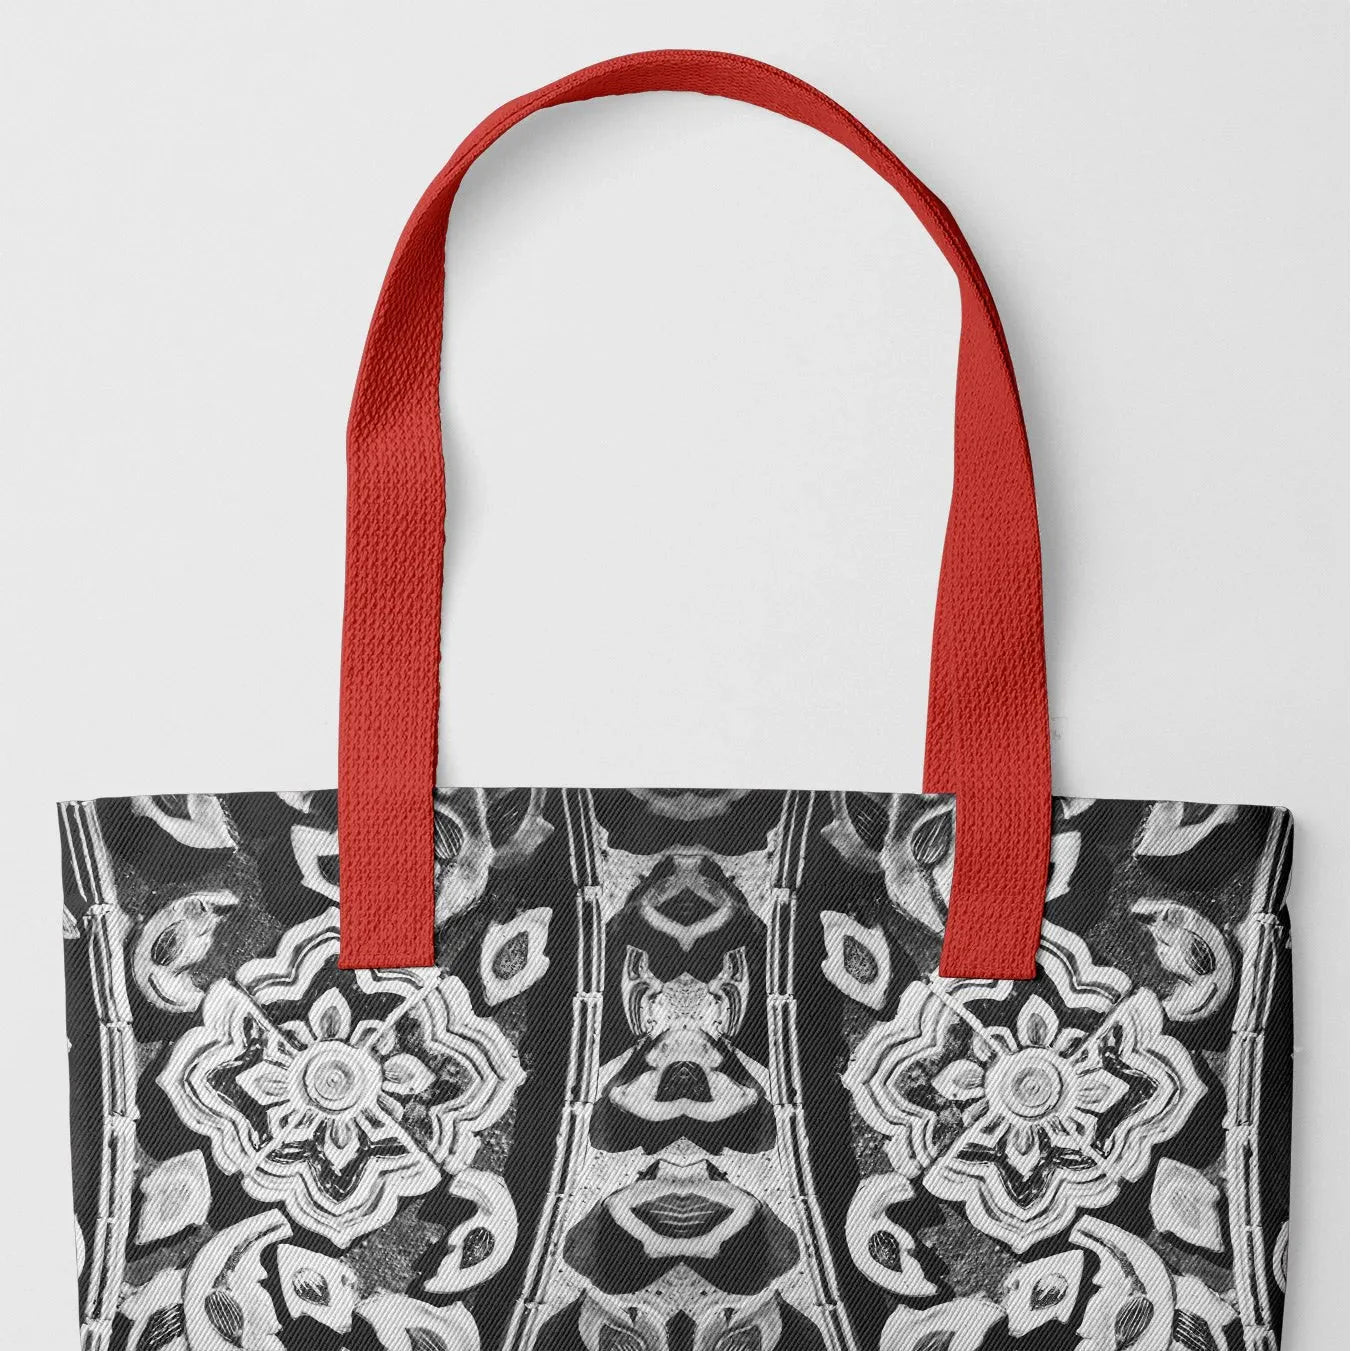 Masala Thai Tote - Black And White - Heavy Duty Reusable Grocery Bag - Red Handles - Shopping Totes - Aesthetic Art